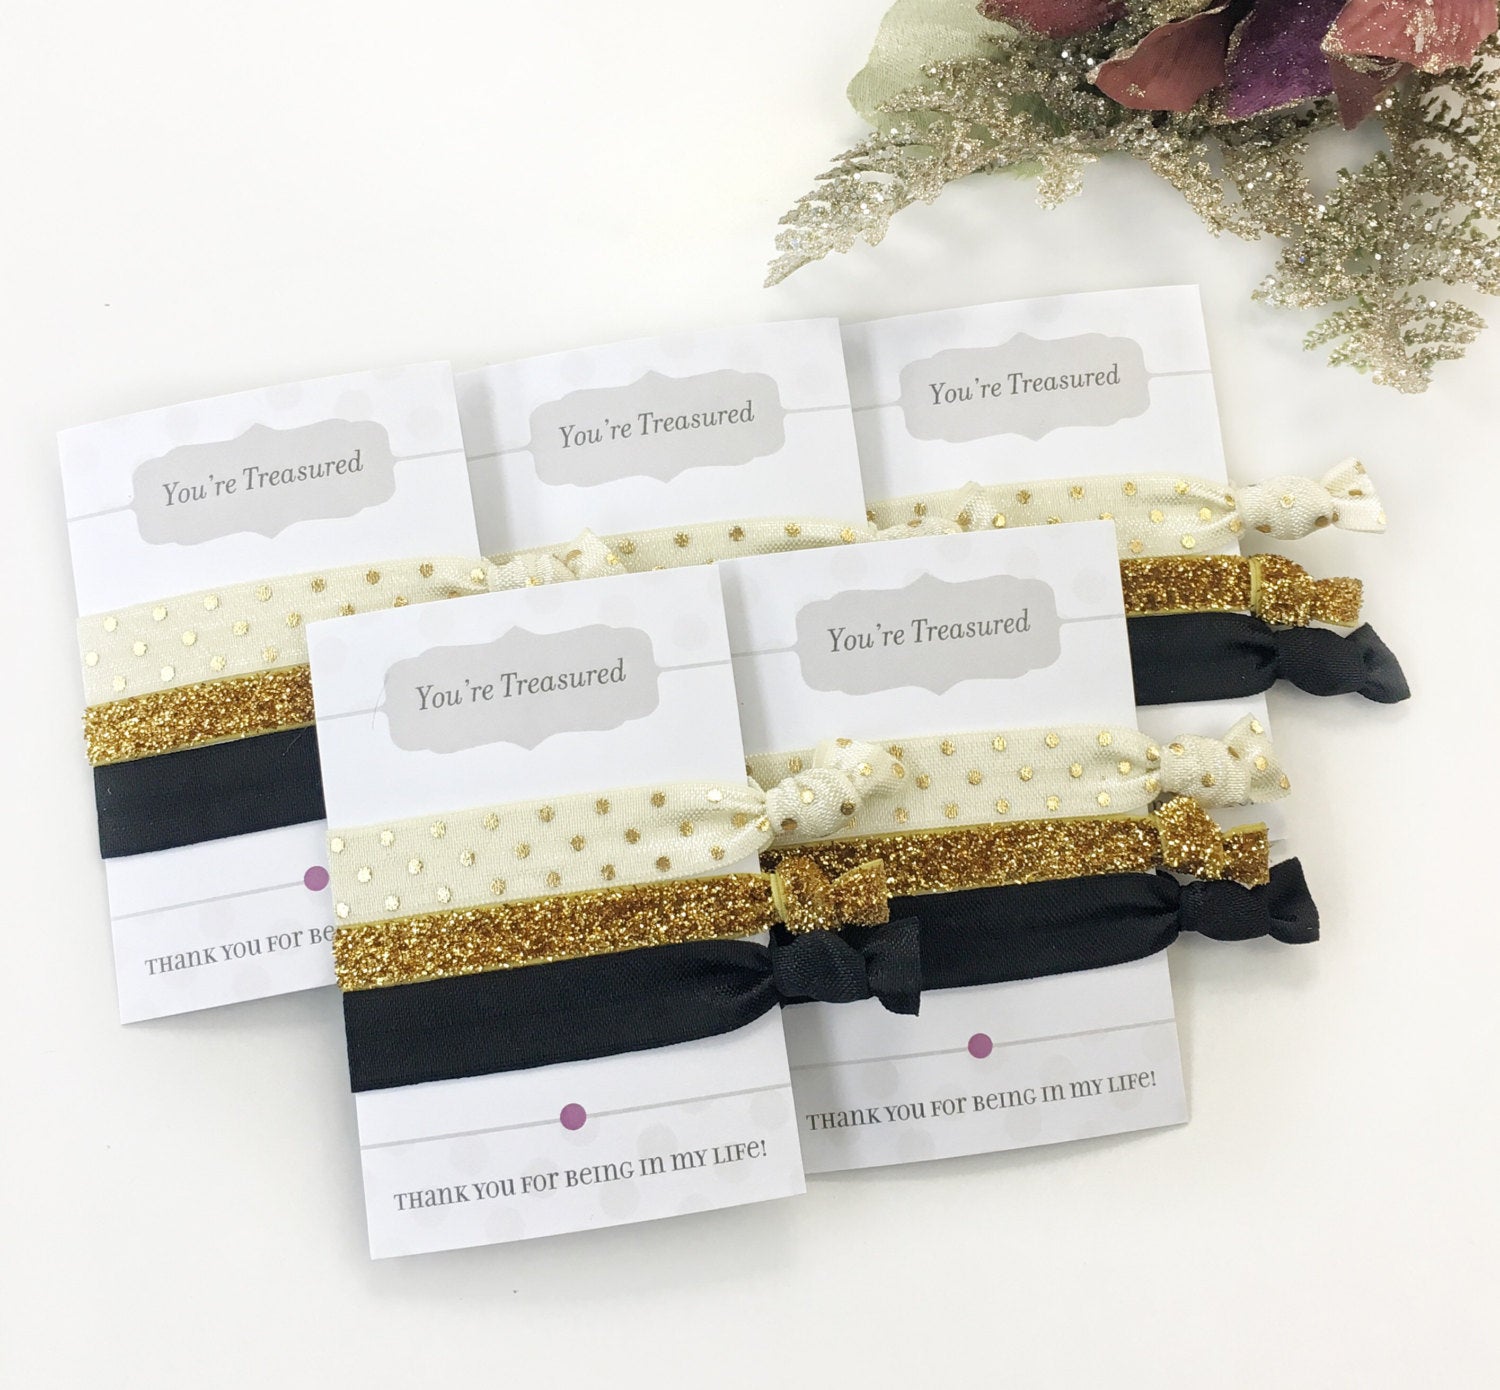 You're Treasured Christmas Gifts for Friends, Hair Ties - PlumPolkaDot